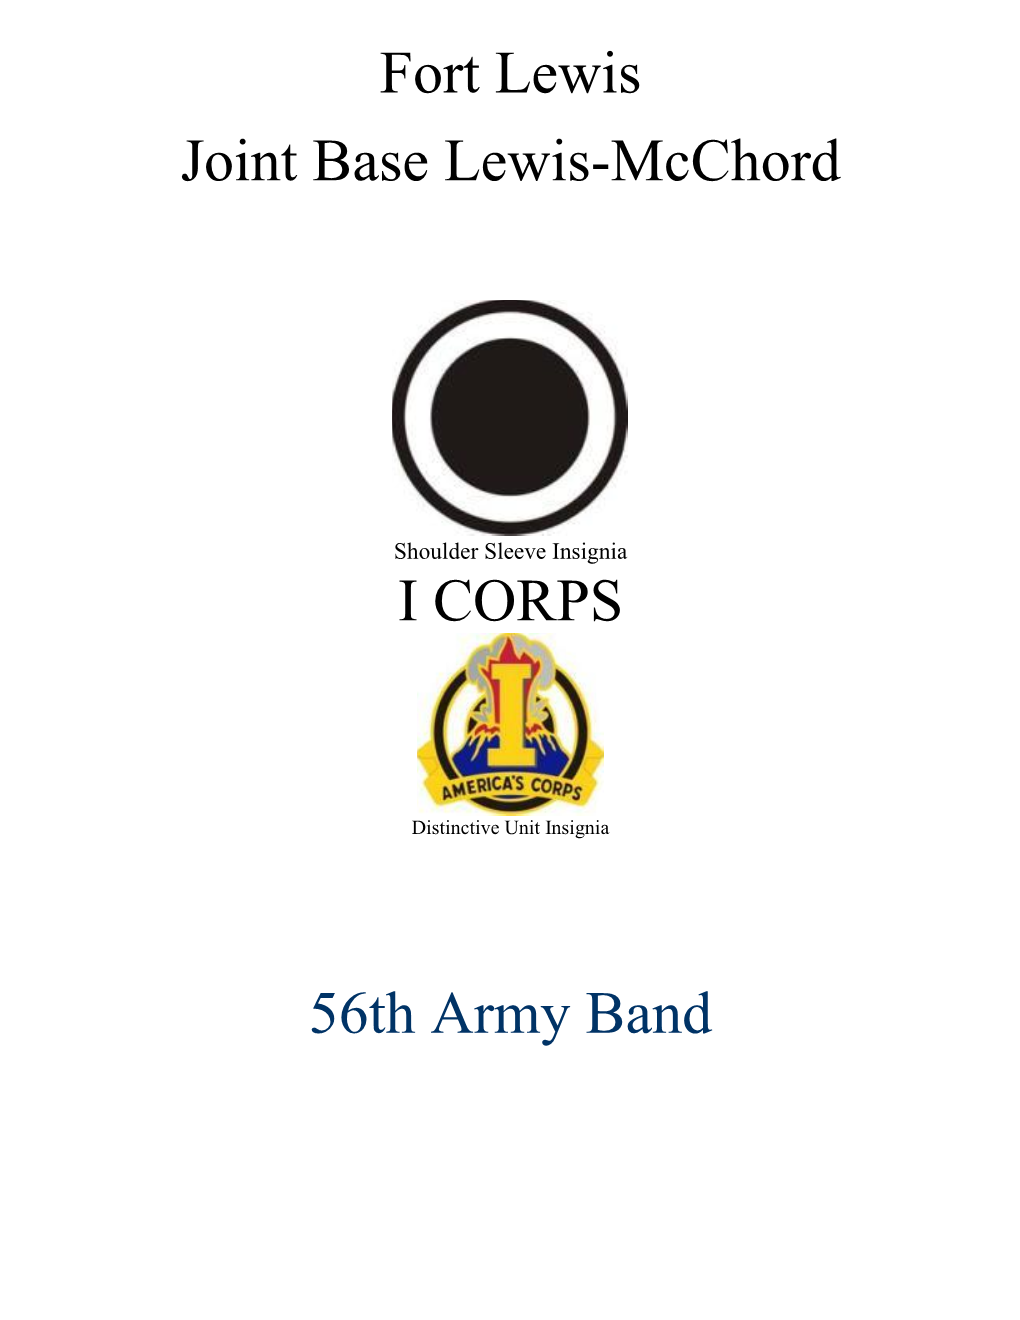 Fort Lewis / Joint Base Lewis-Mcchord